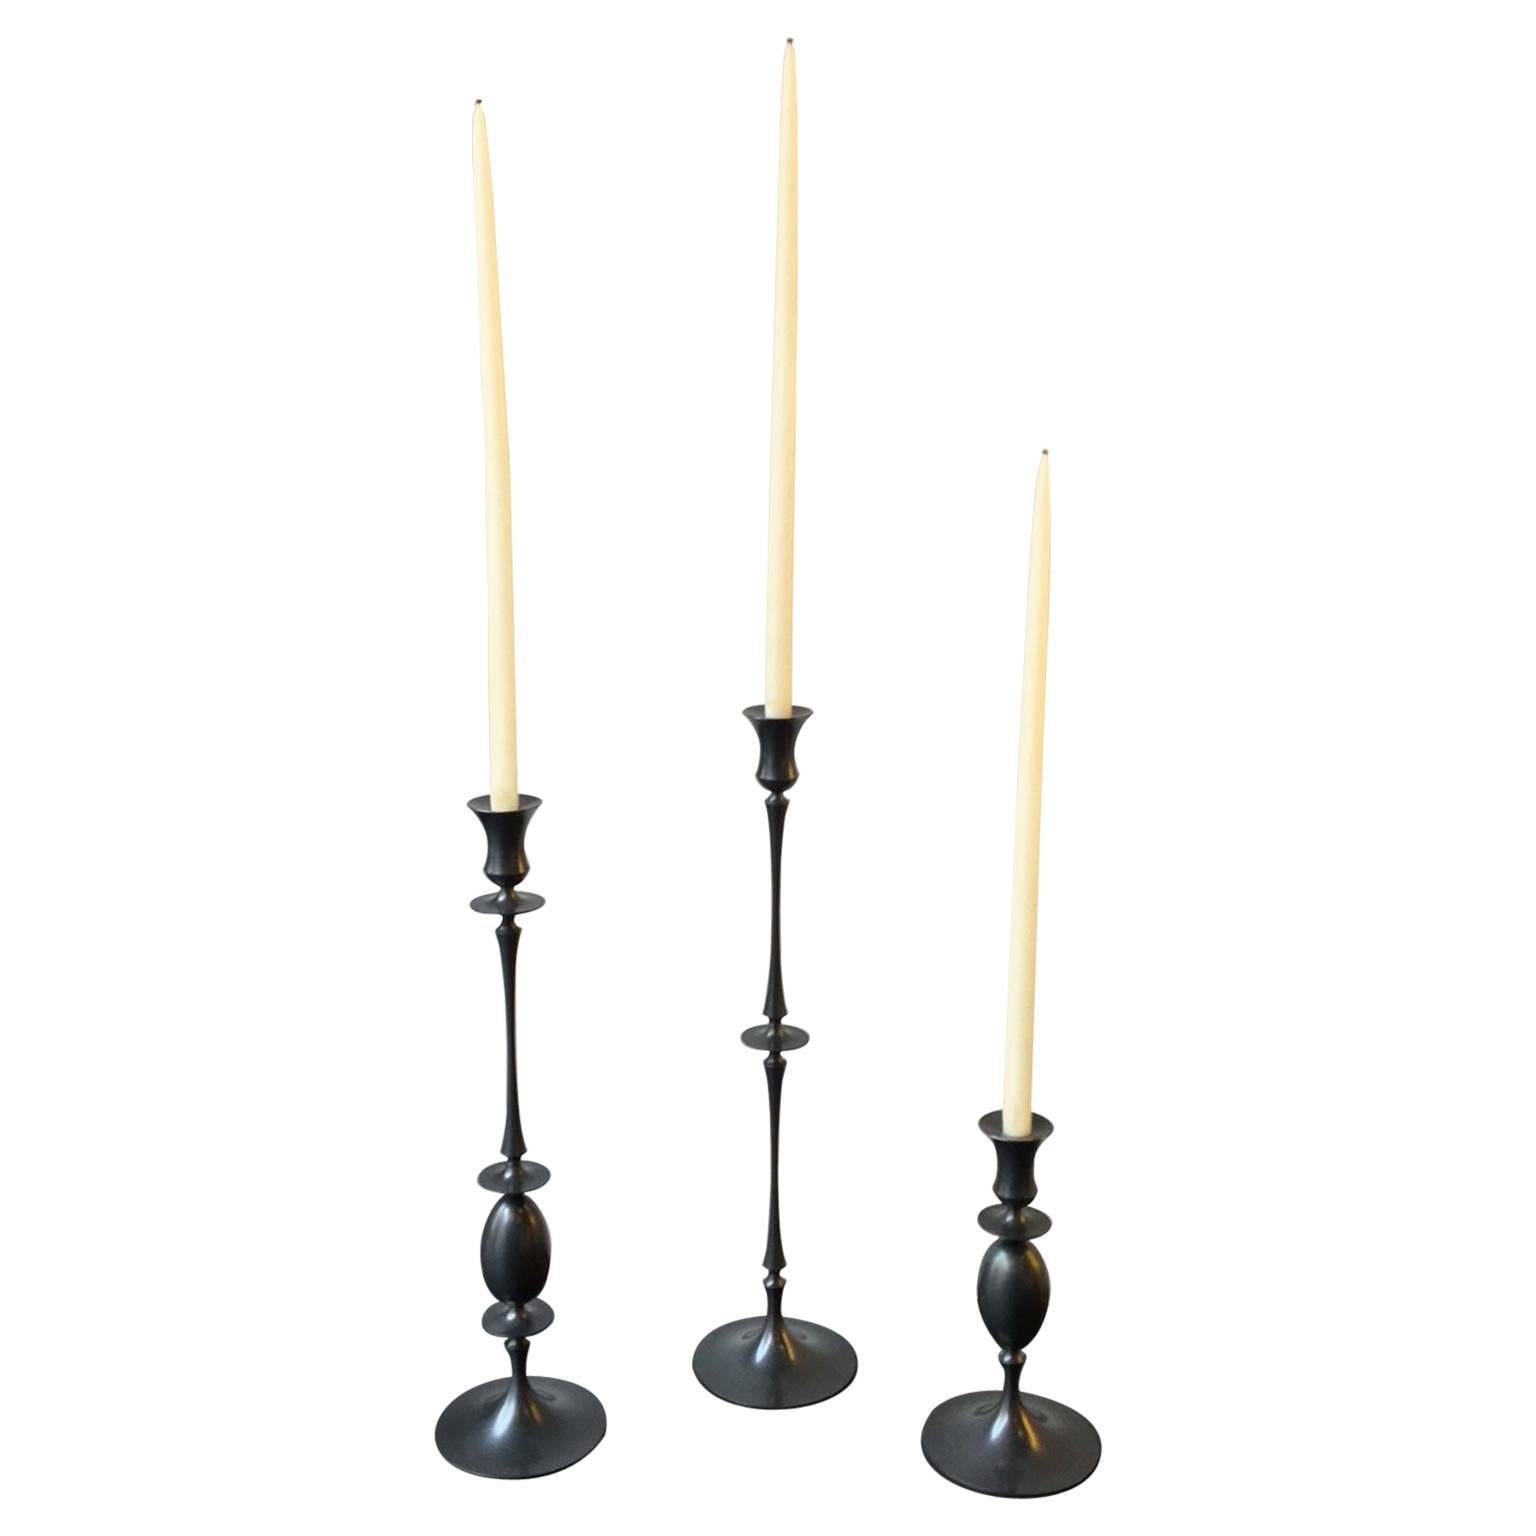 Ted Muehling Biedermeier Candlestick Collection in Oxidized Bronze, Set of Three For Sale